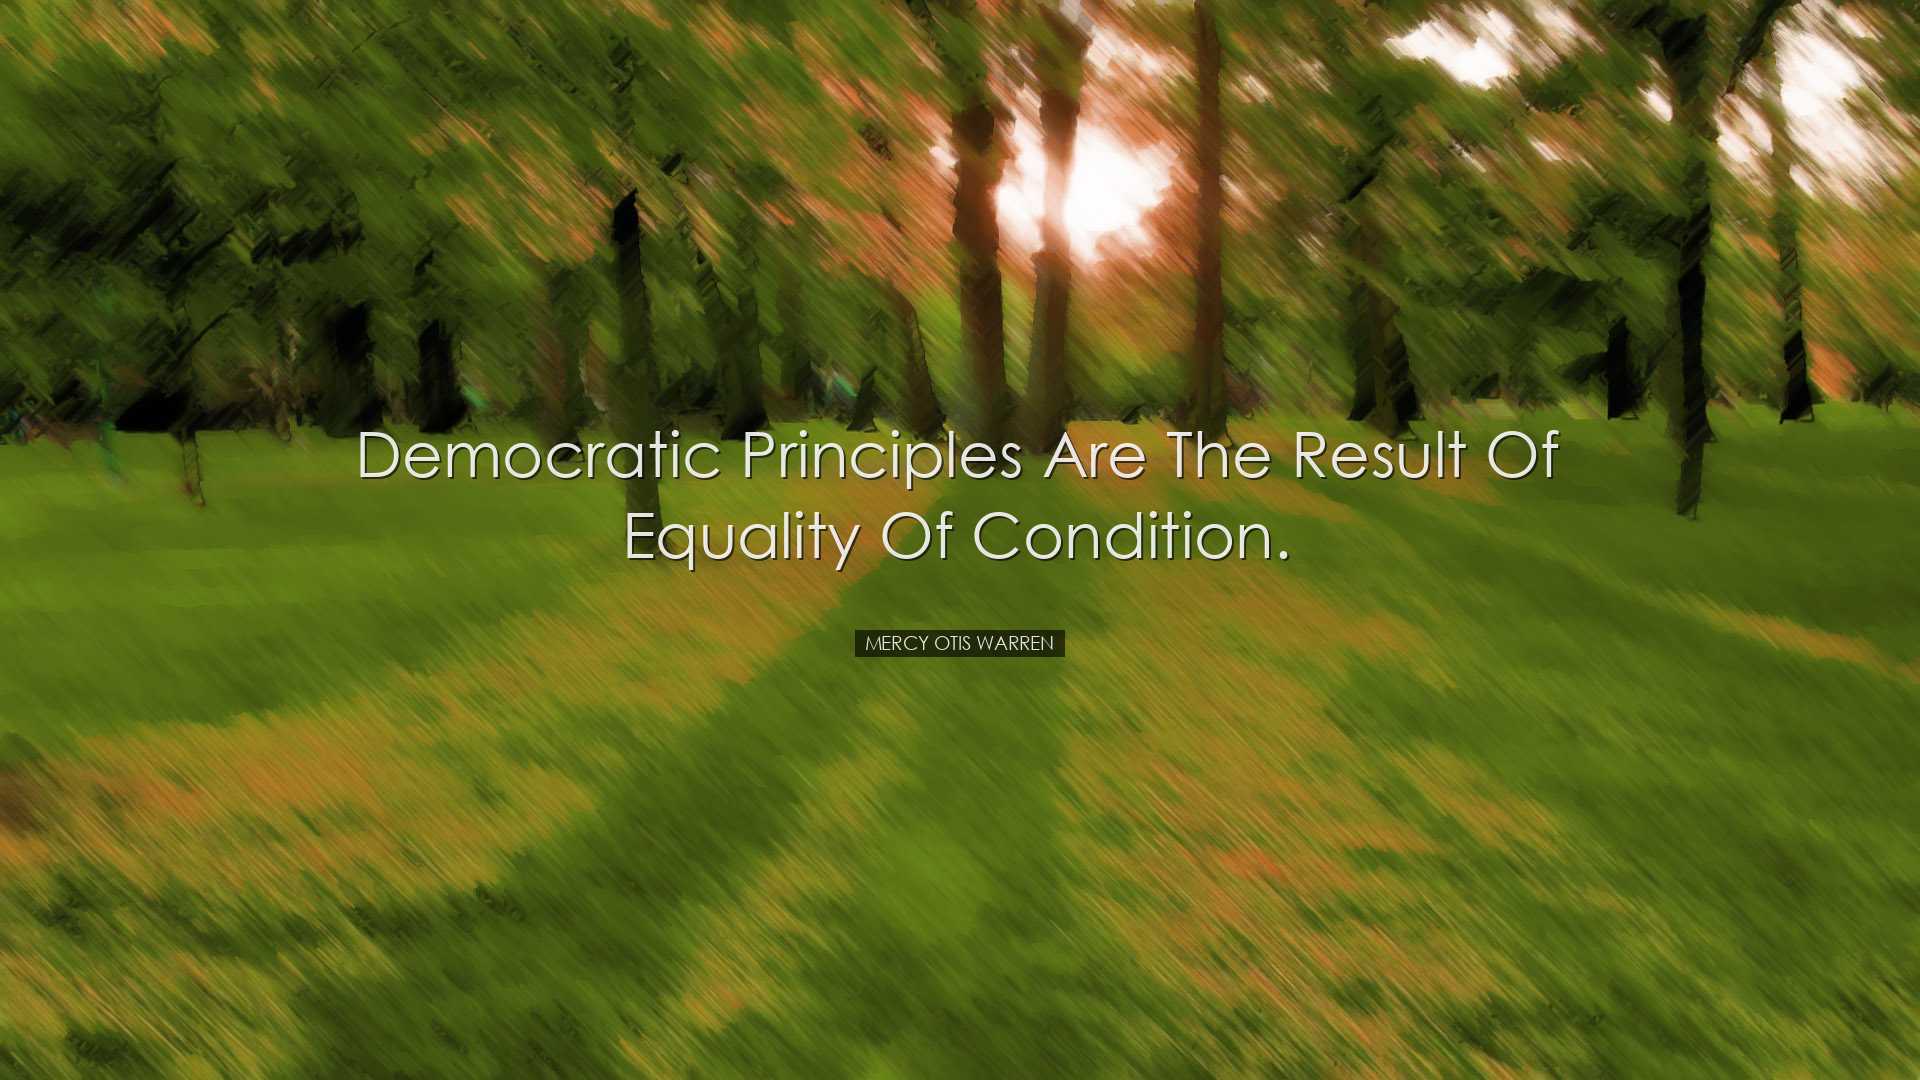 Democratic principles are the result of equality of condition. - M